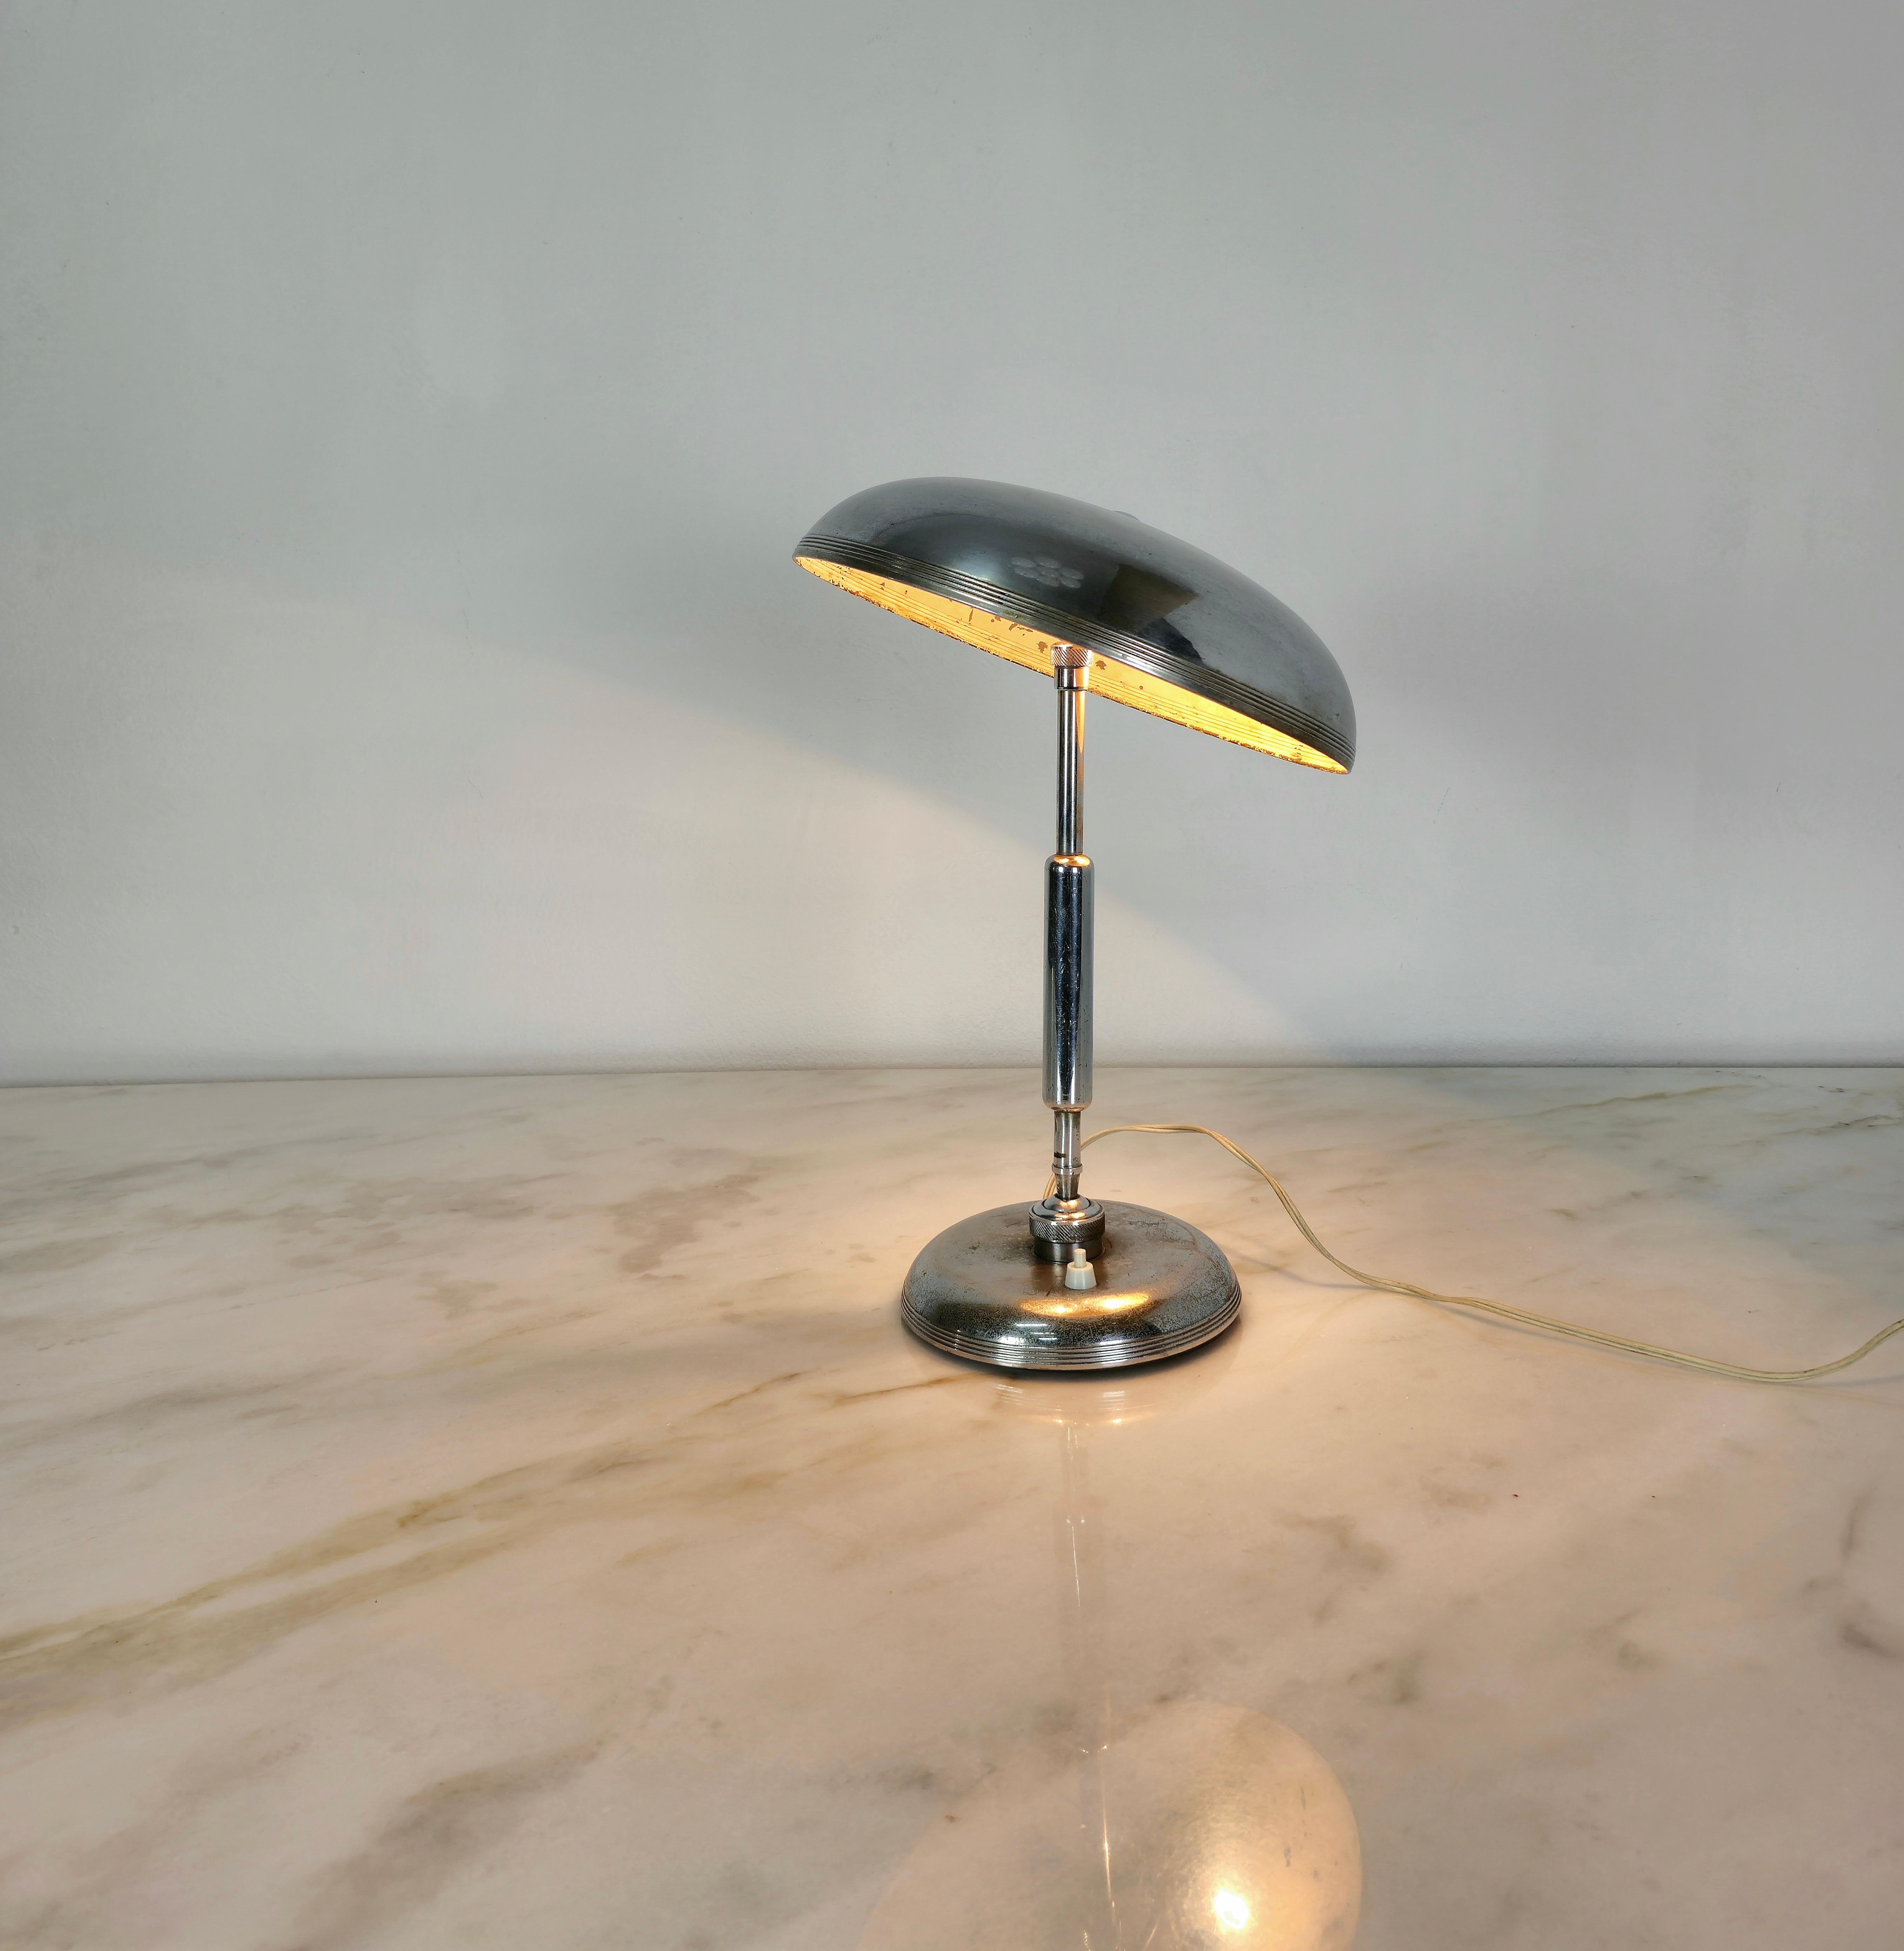 Rare table lamp designed by the architect Giovanni Michelucci and produced in the 1950s in Italy by Lariolux.
The lamp has an ingenious functionality thanks to the two joints, one positioned at the base of the stem and one on the diffuser, making